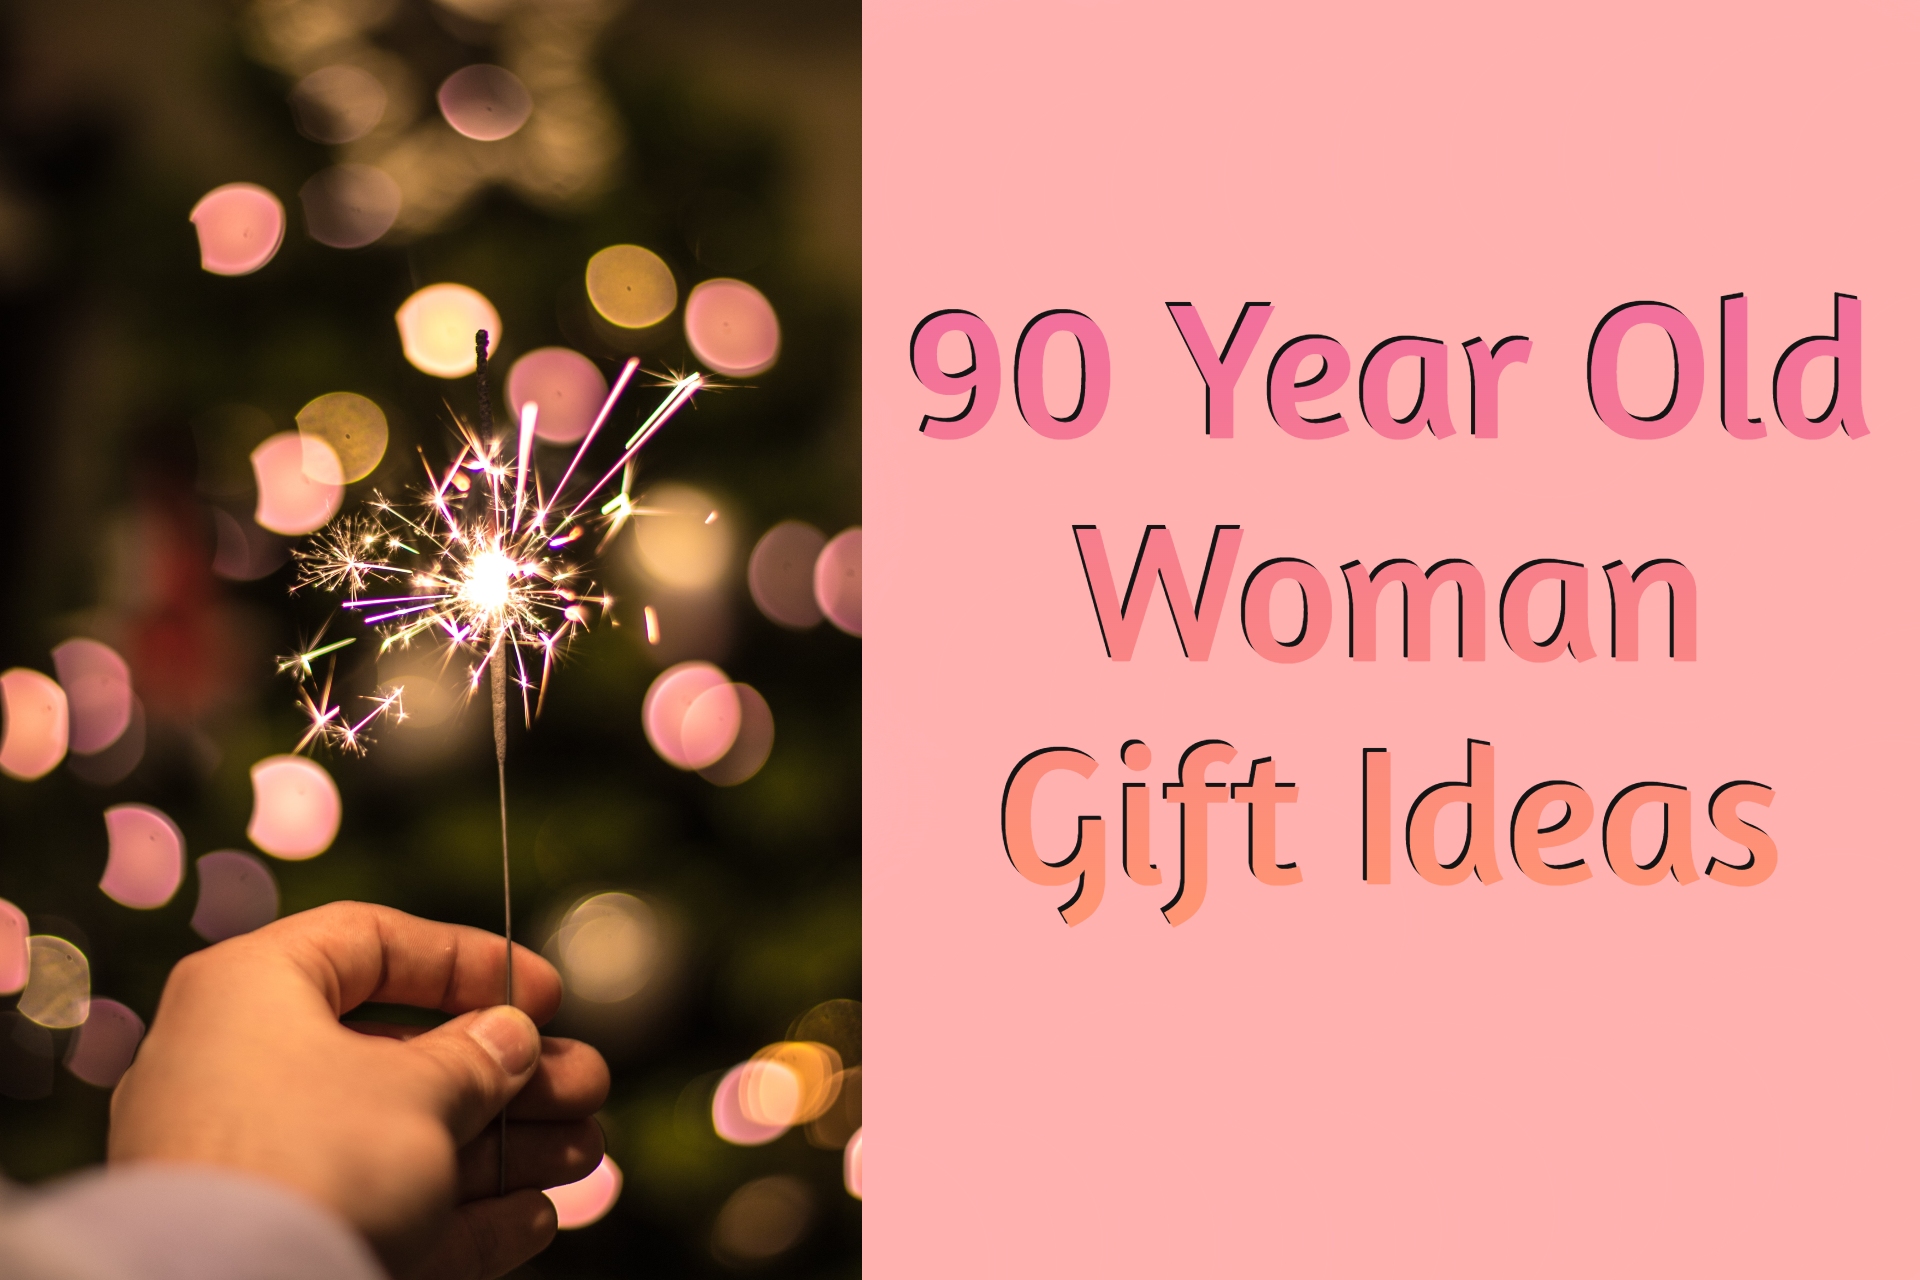 Cover image of gift ideas for 90-year-old woman by Giftsedge